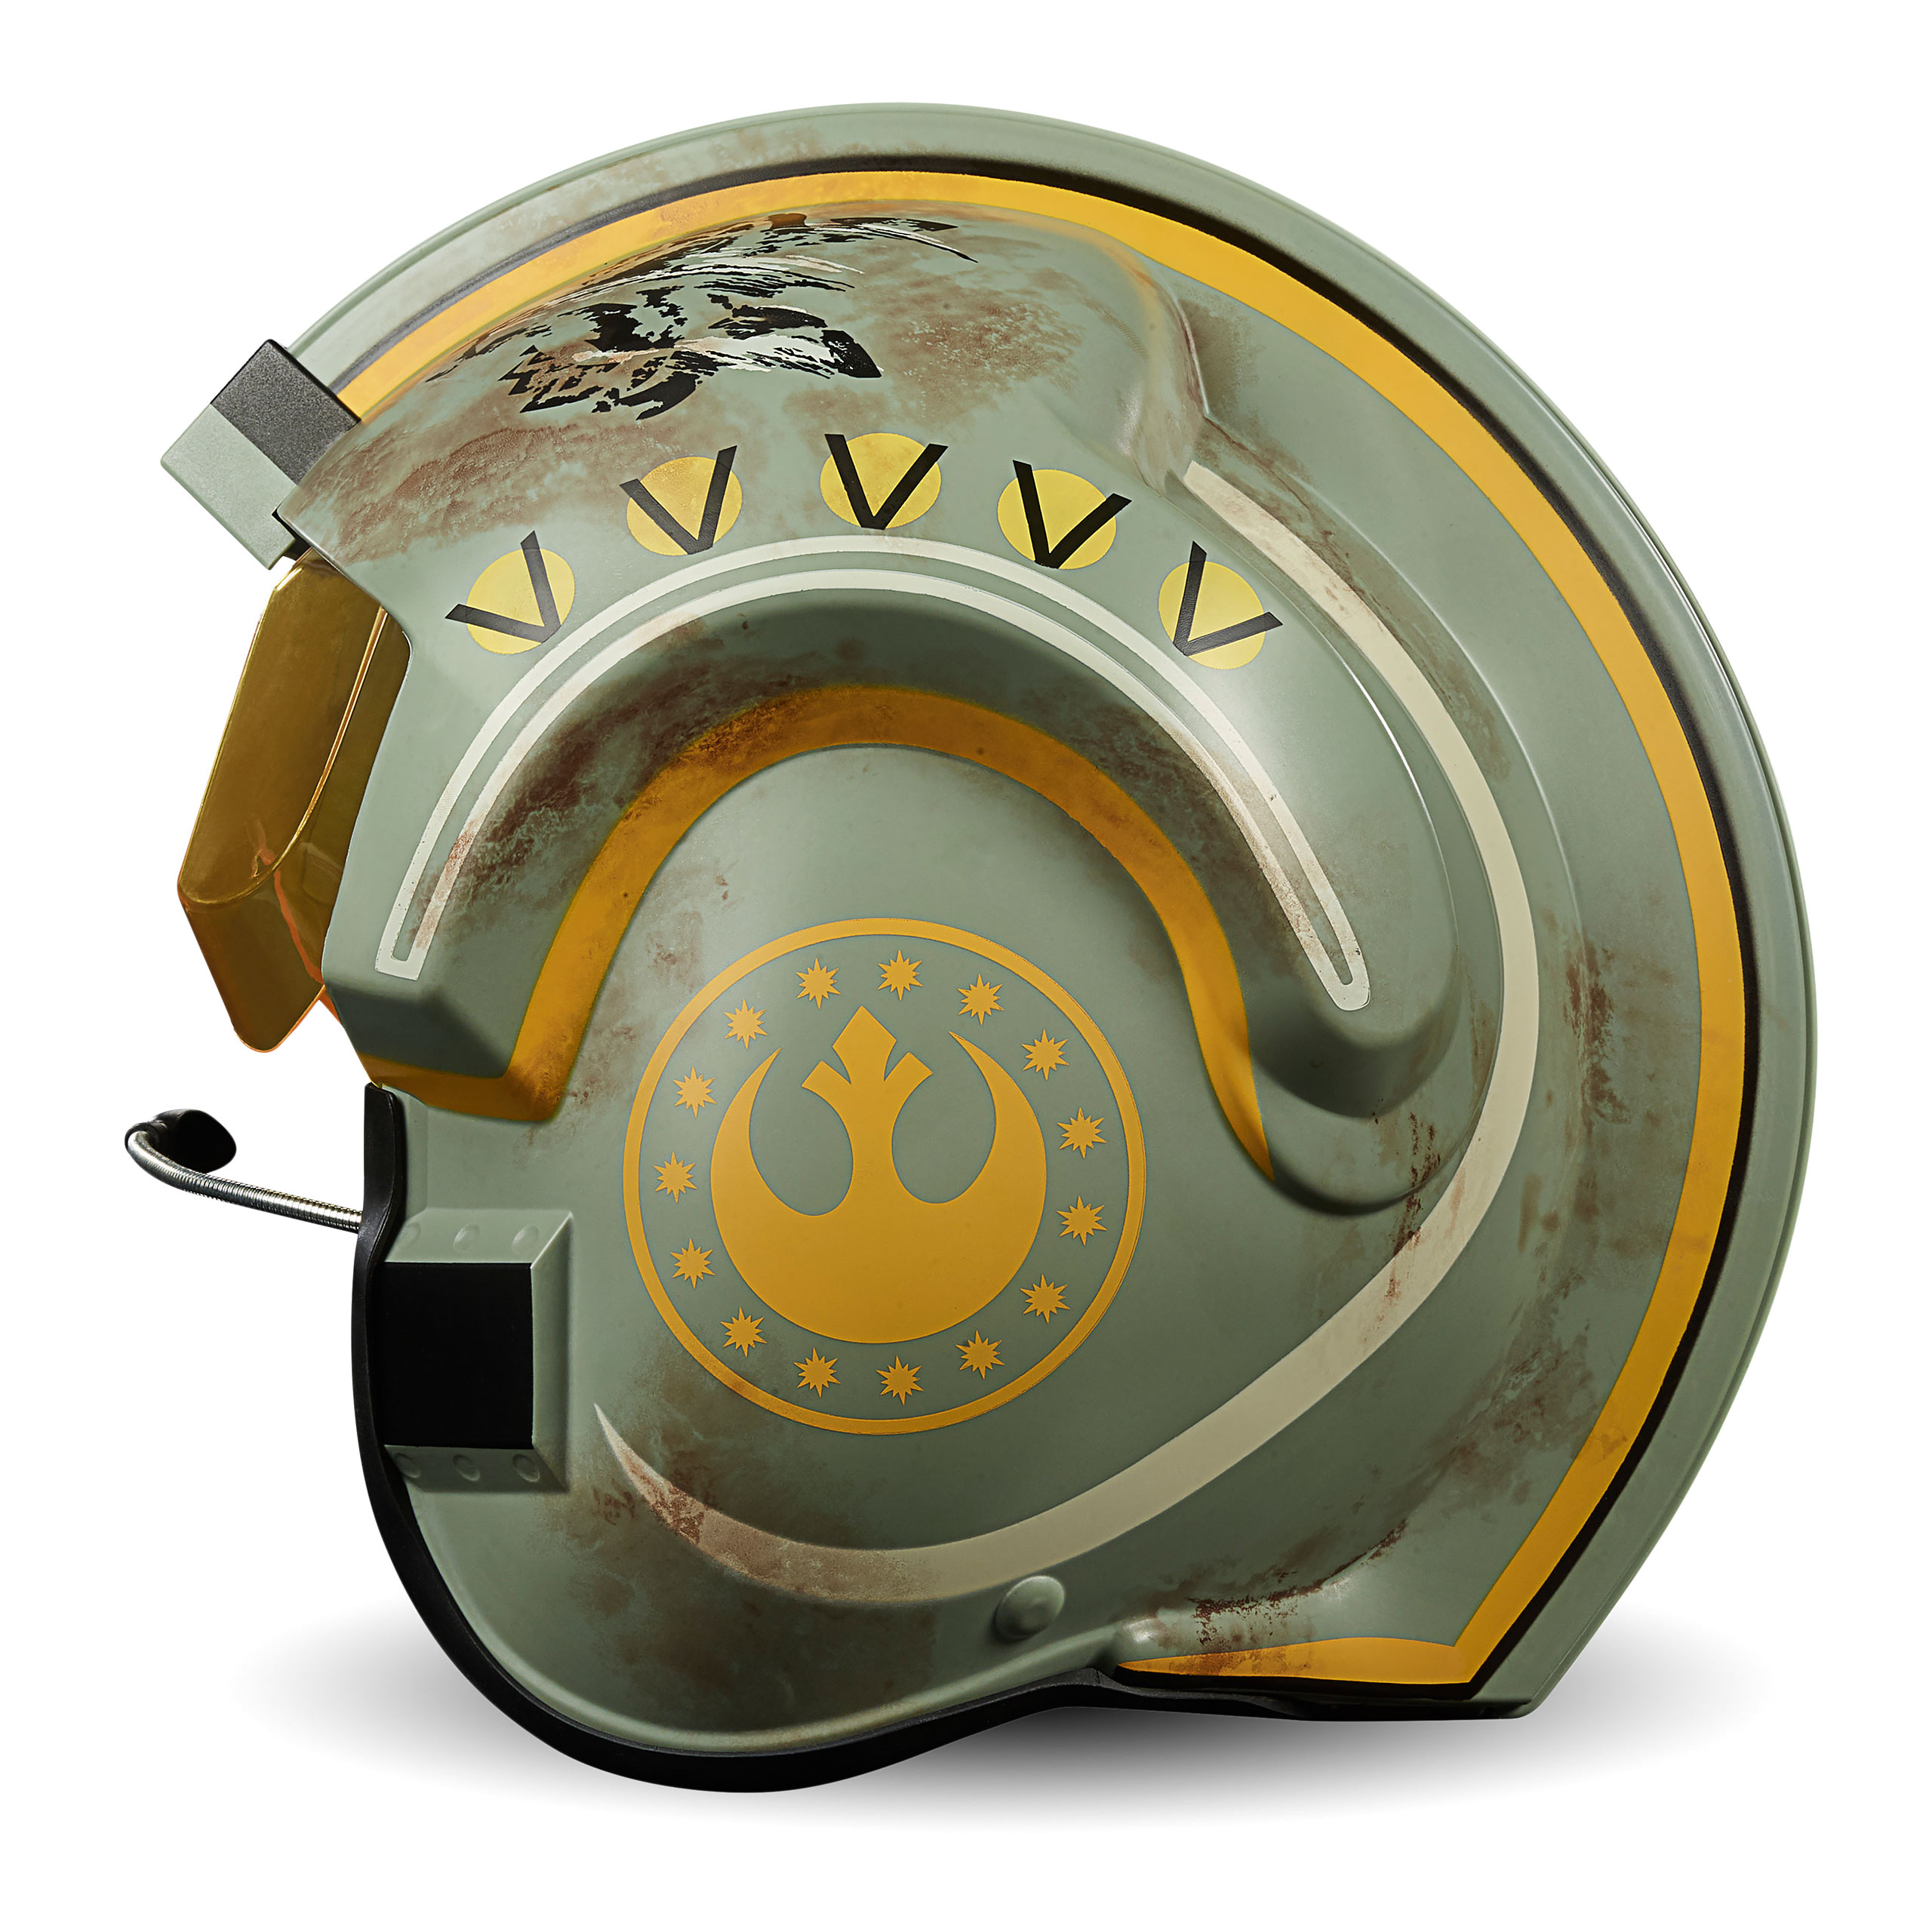 Star Wars - Trapper Wolf Helmet Replica with Light and Sound Effects